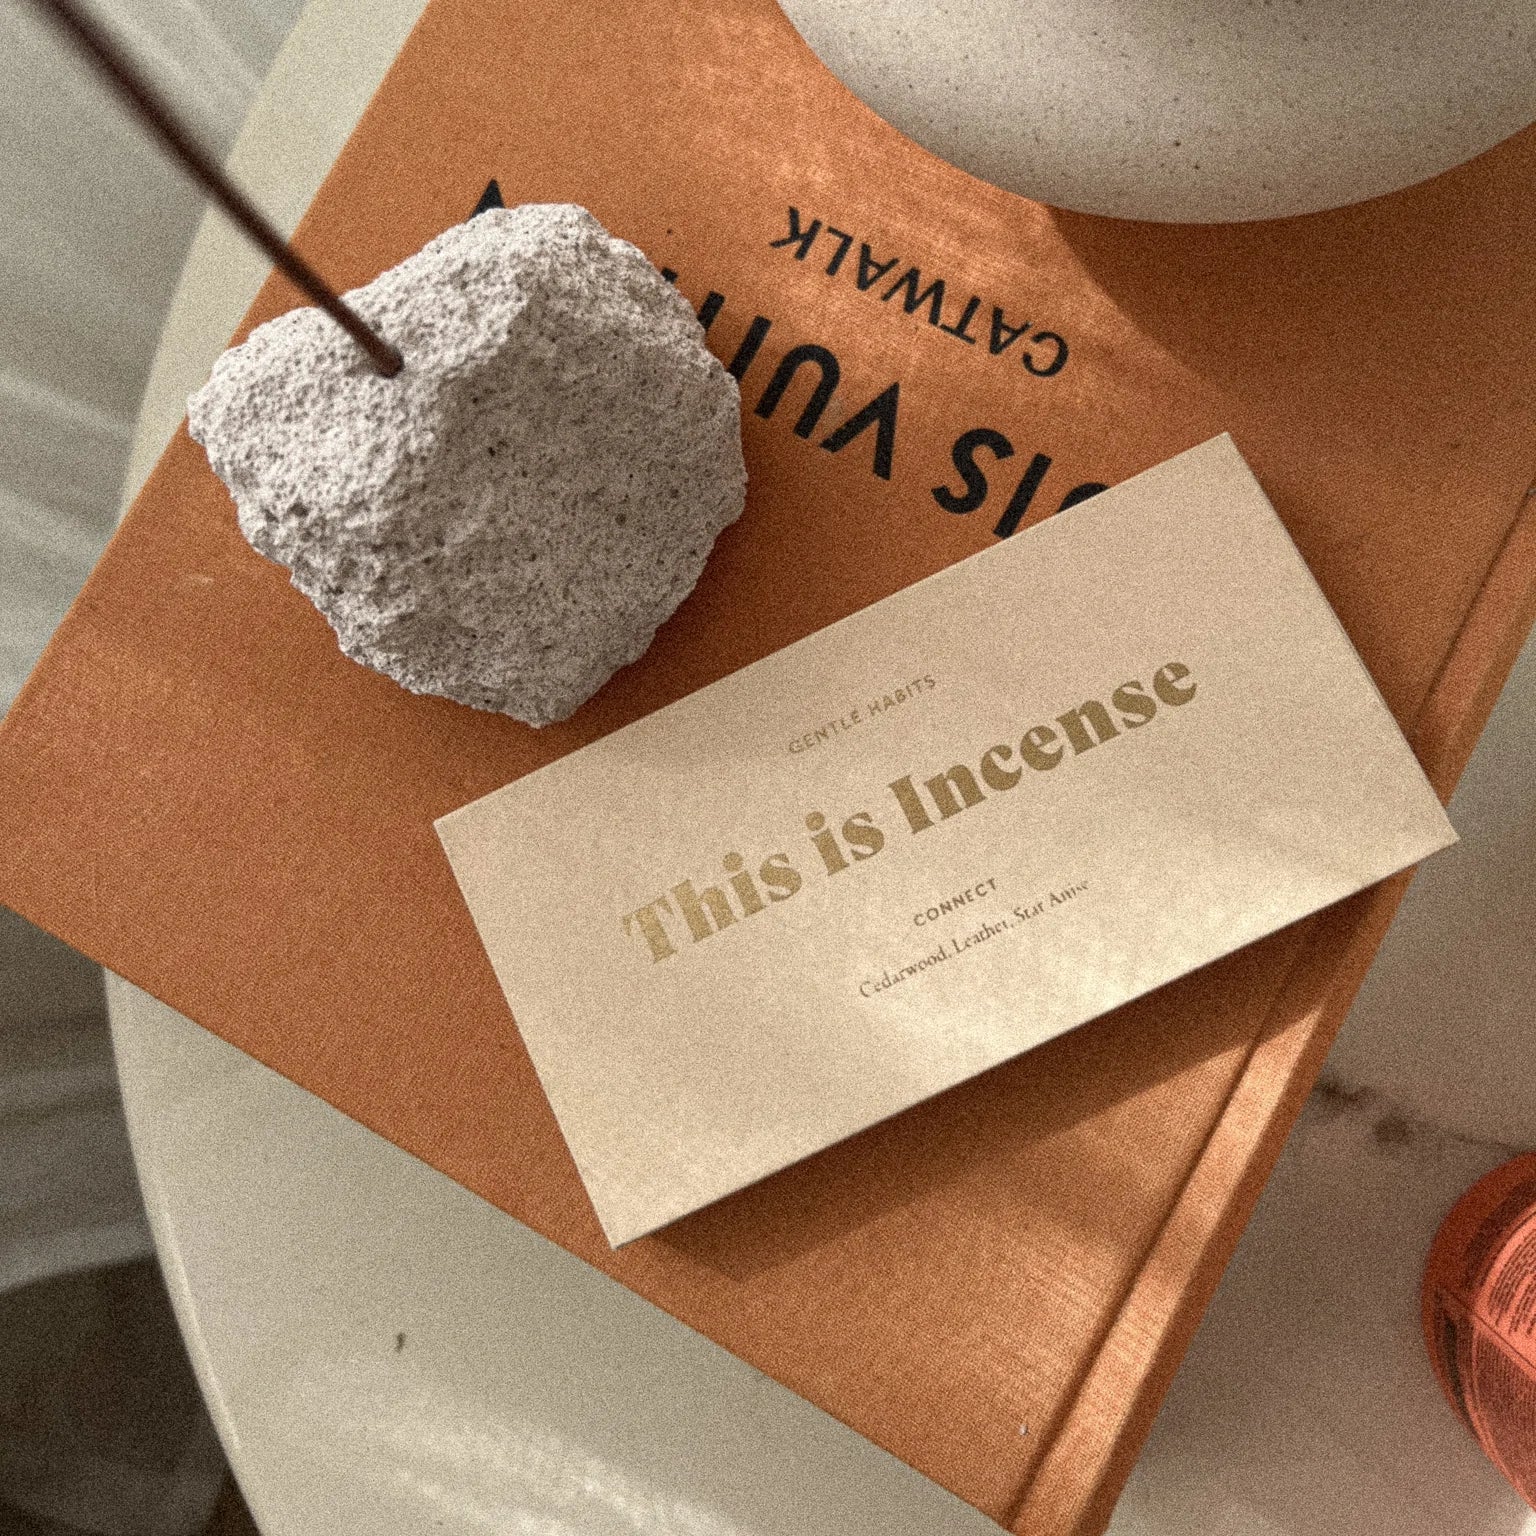 THIS IS INCENSE: CONNECT